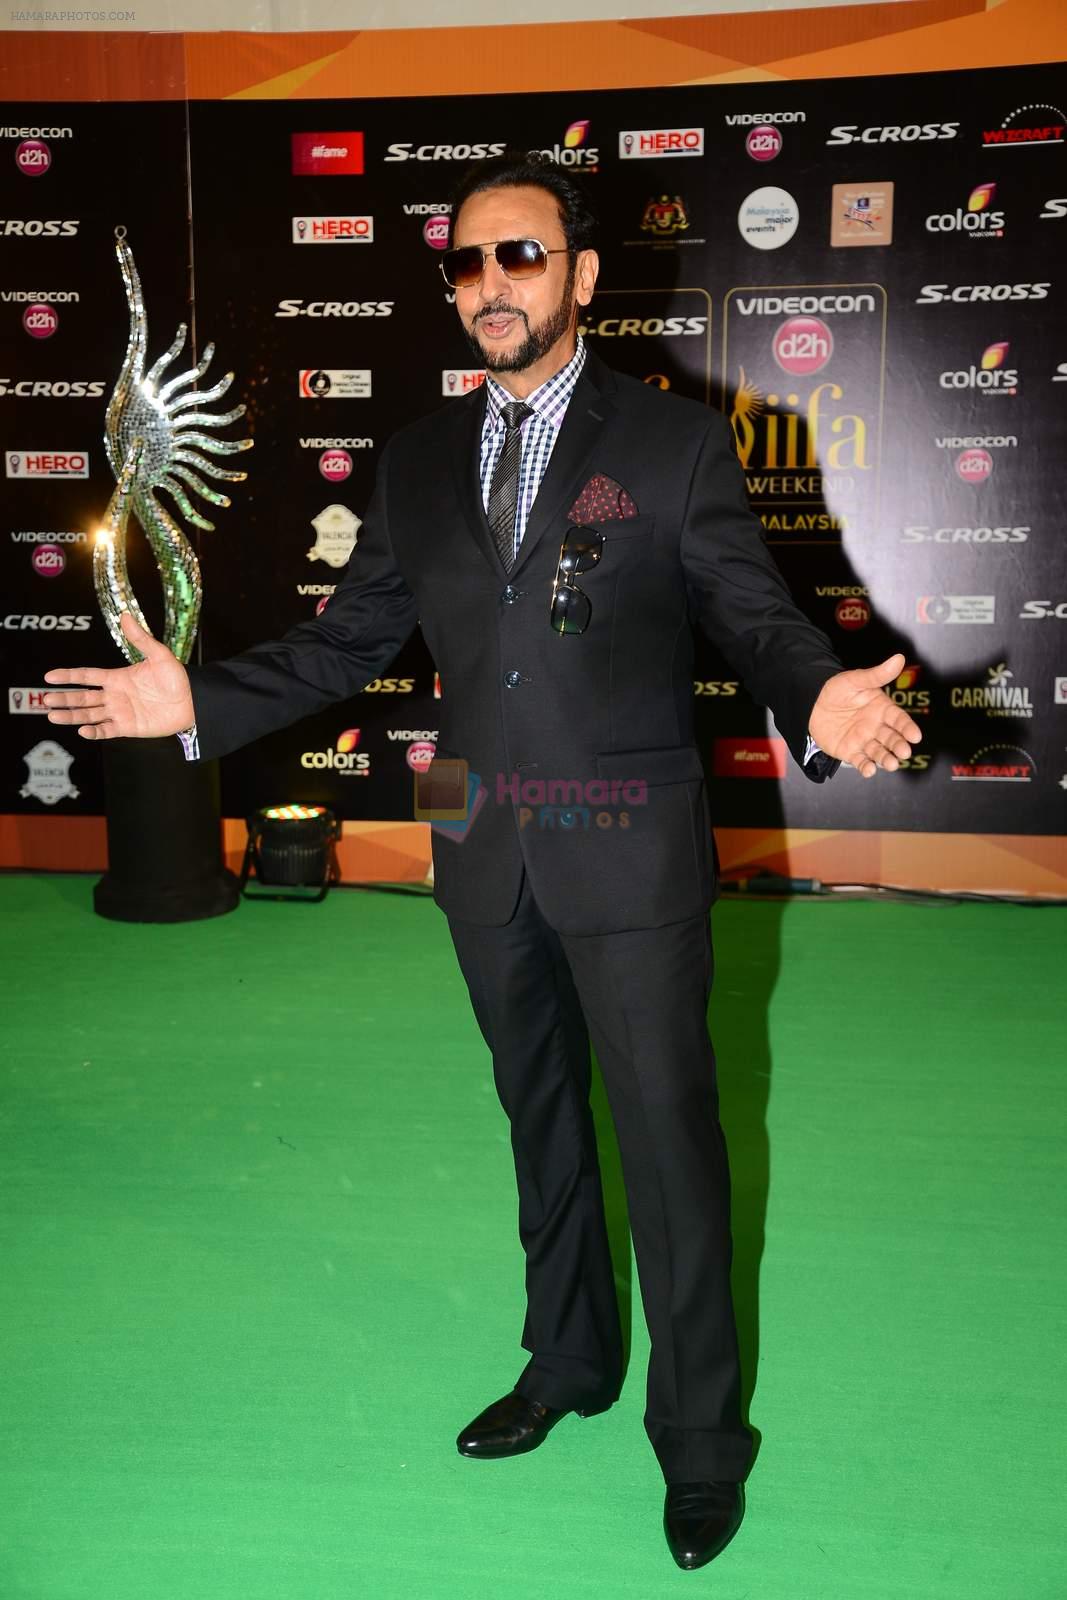 Gulshan Grover at IIFA 2015 Awards day 3 red carpet on 7th June 2015